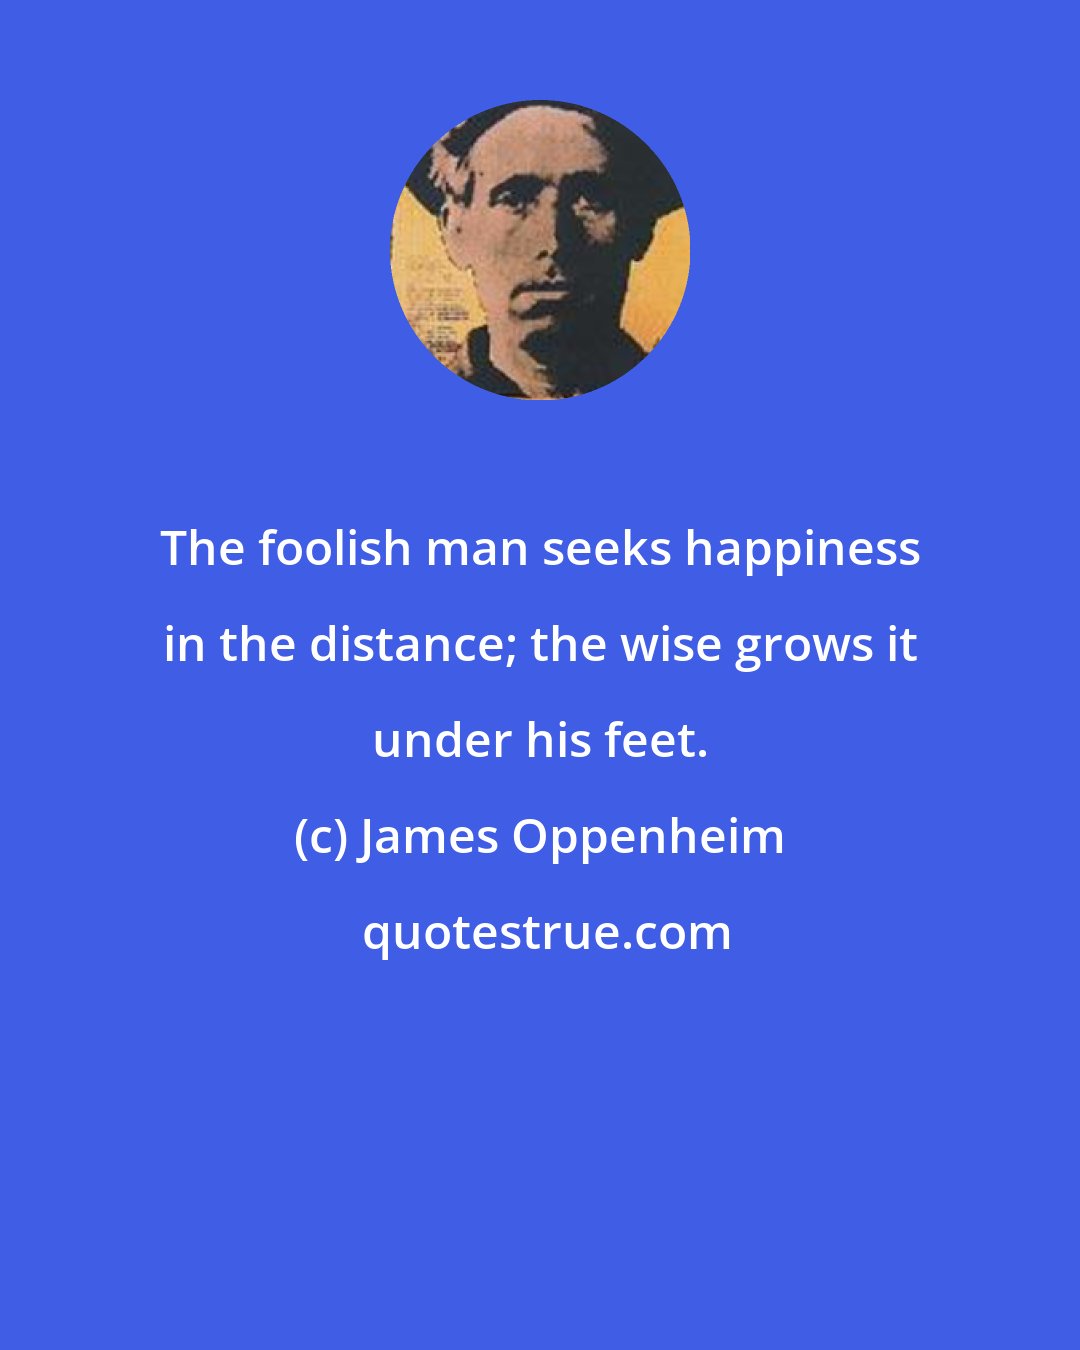 James Oppenheim: The foolish man seeks happiness in the distance; the wise grows it under his feet.